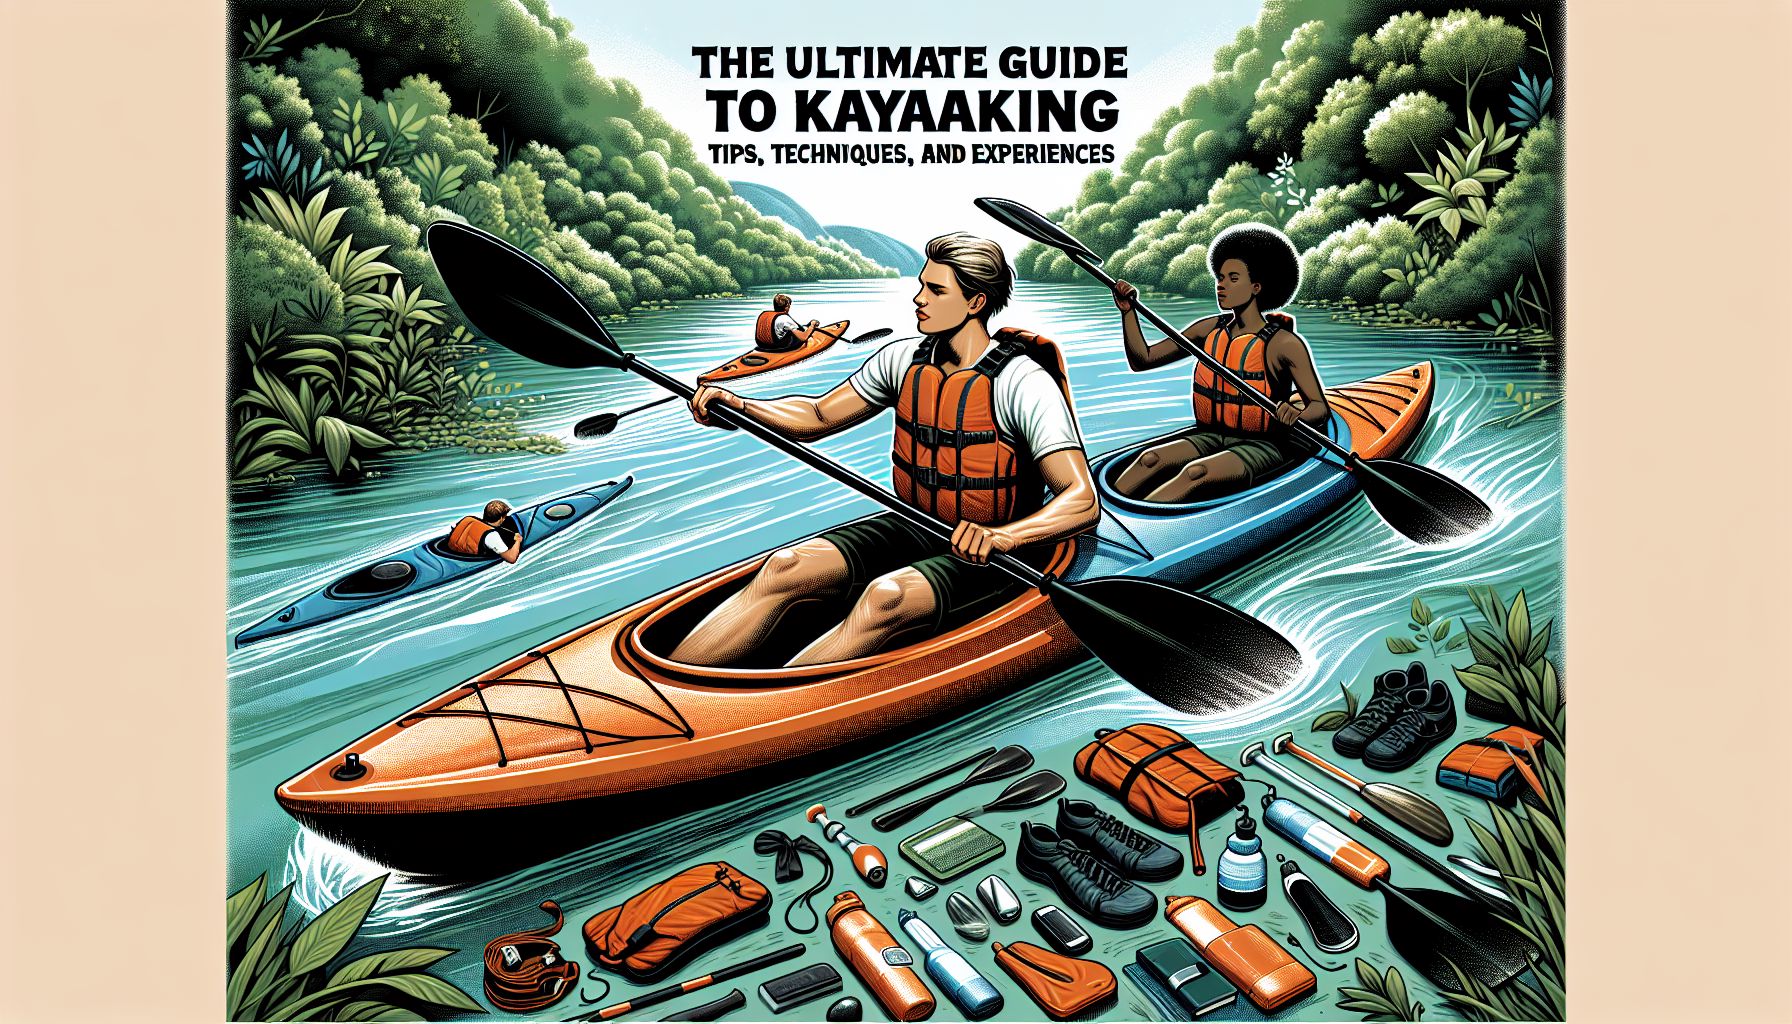 The Ultimate Guide to Kayaking: Tips, Techniques, and Experiences on the Water